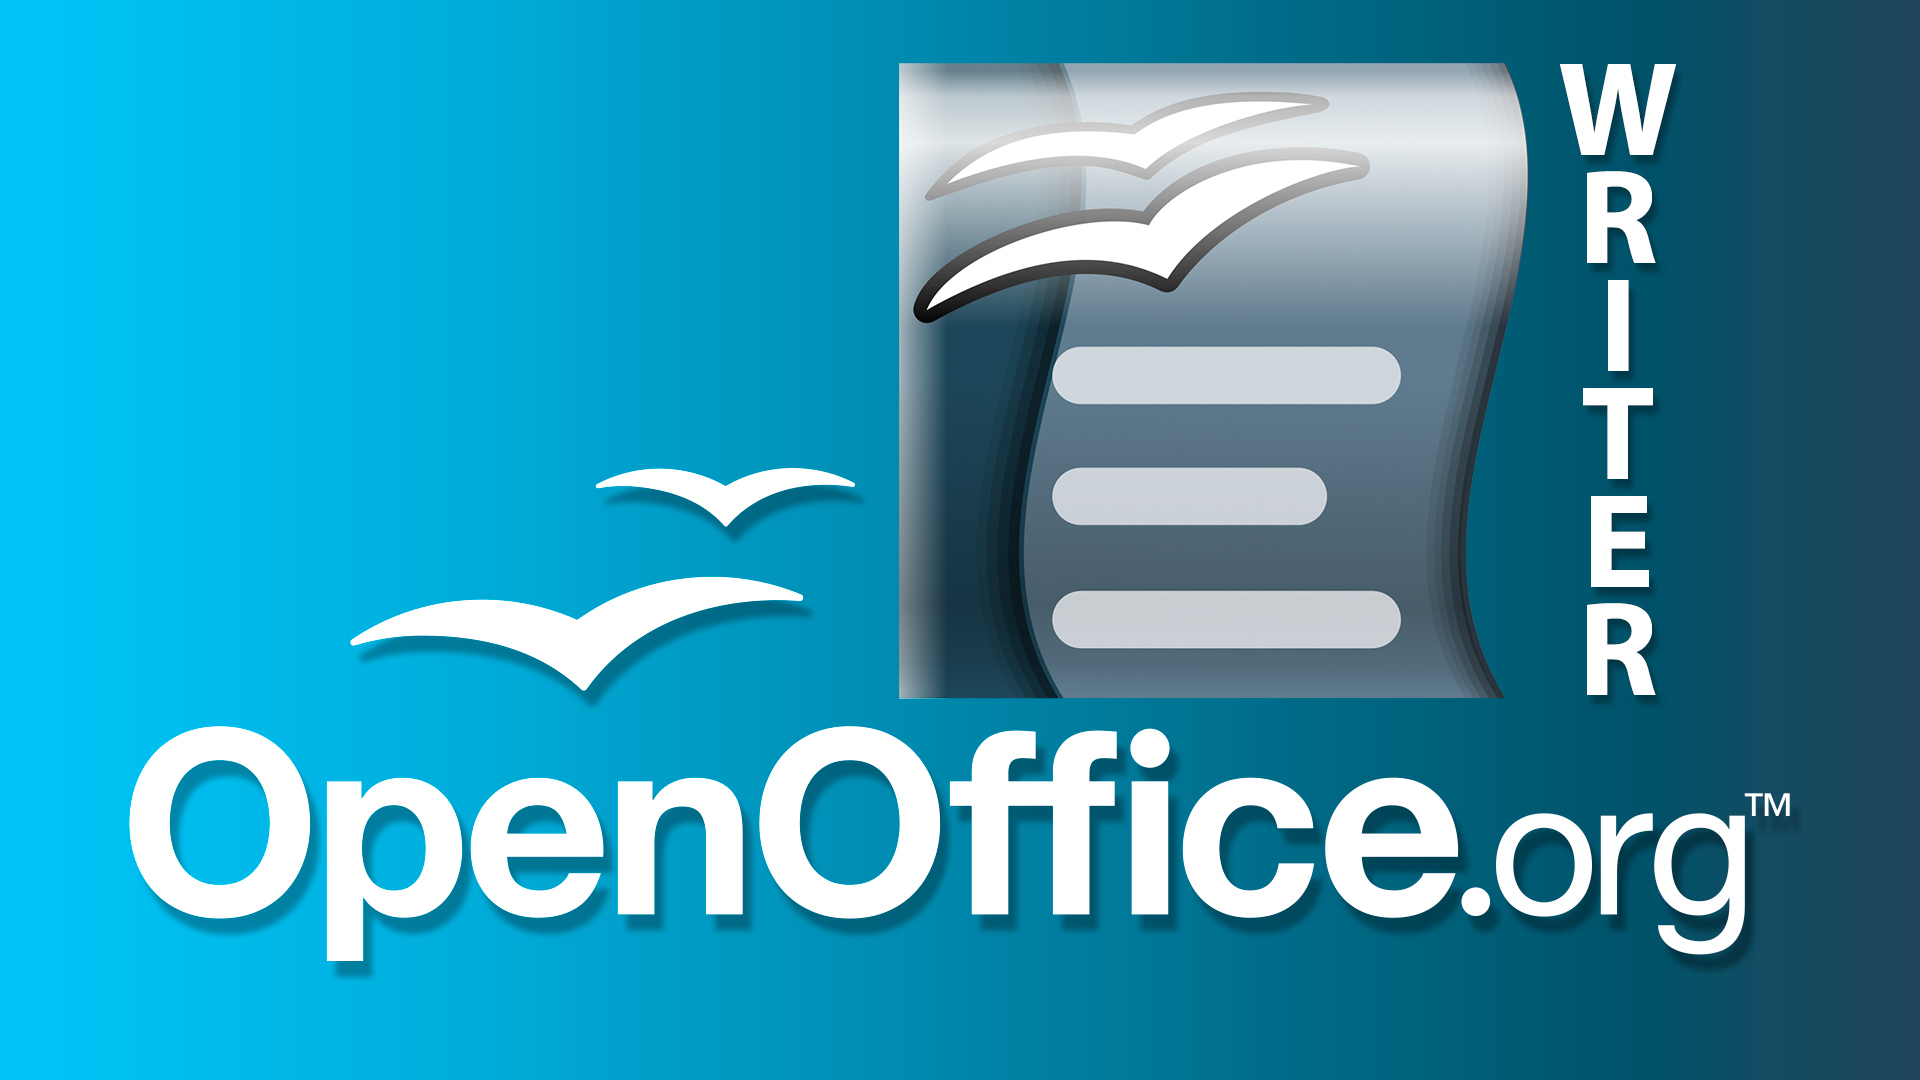 open office writer download for windows 10